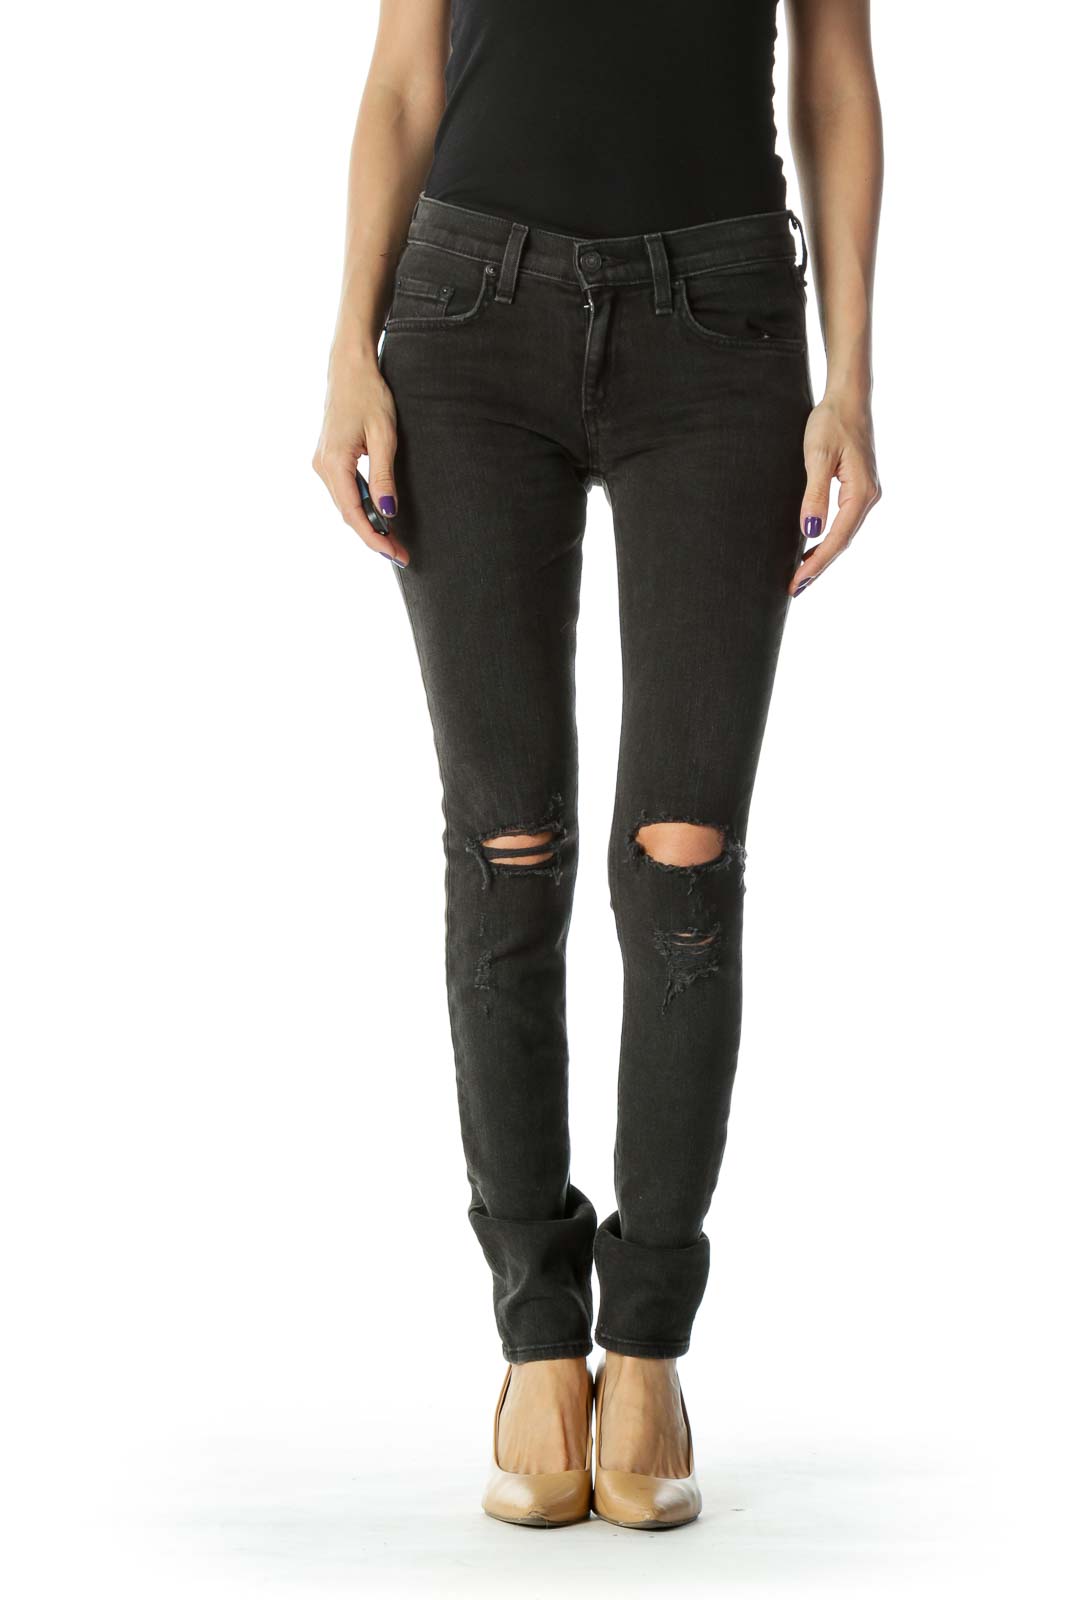 Black Faded Distressed Skinny Jean Front